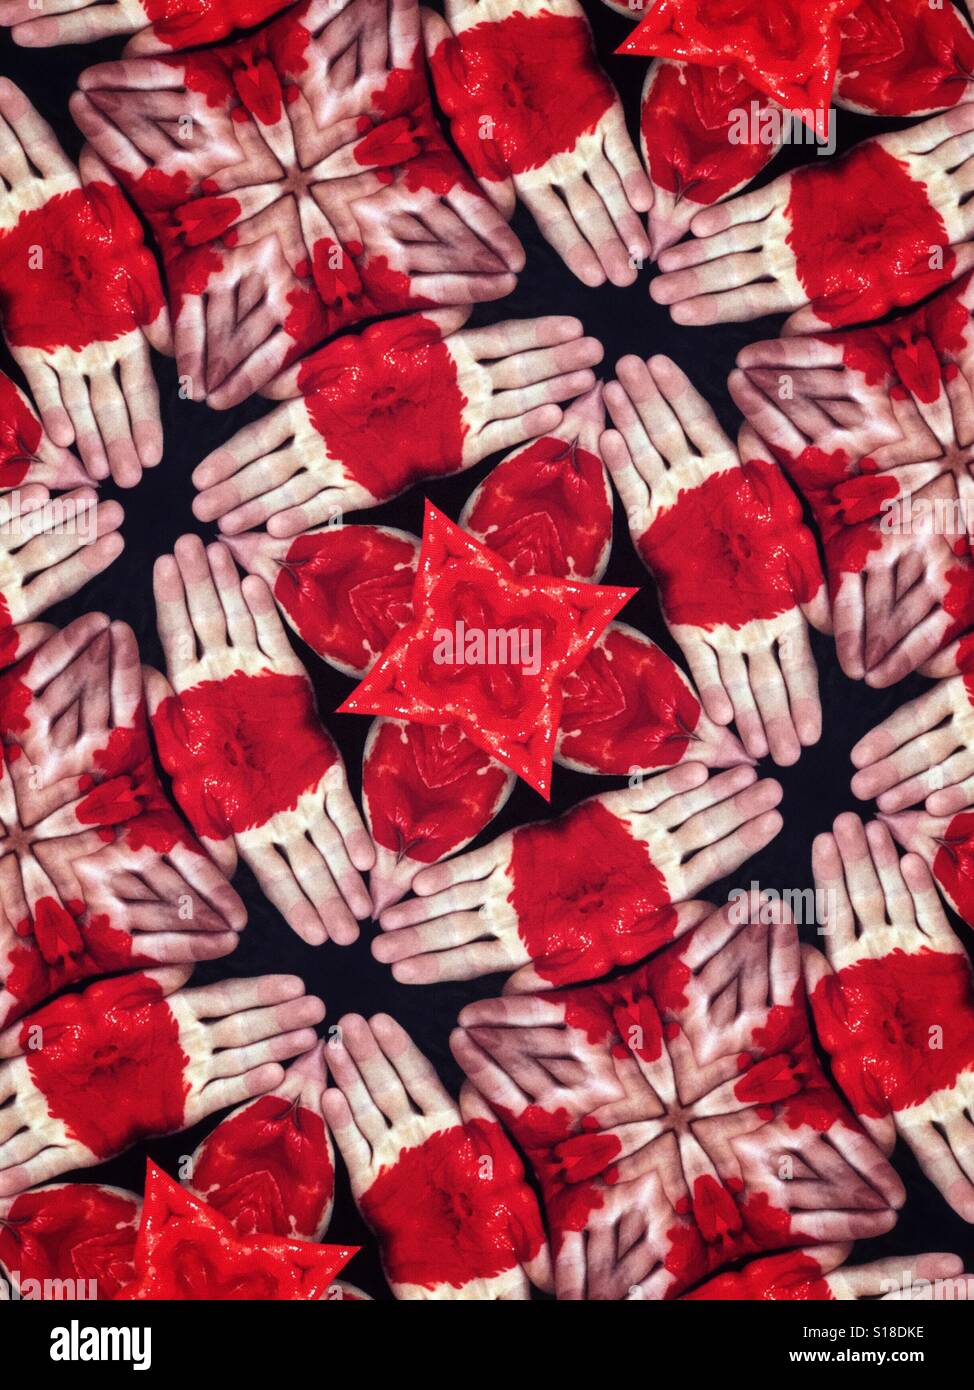 An abstract kaleidoscopic design made from images of human hands with red paint on them Stock Photo